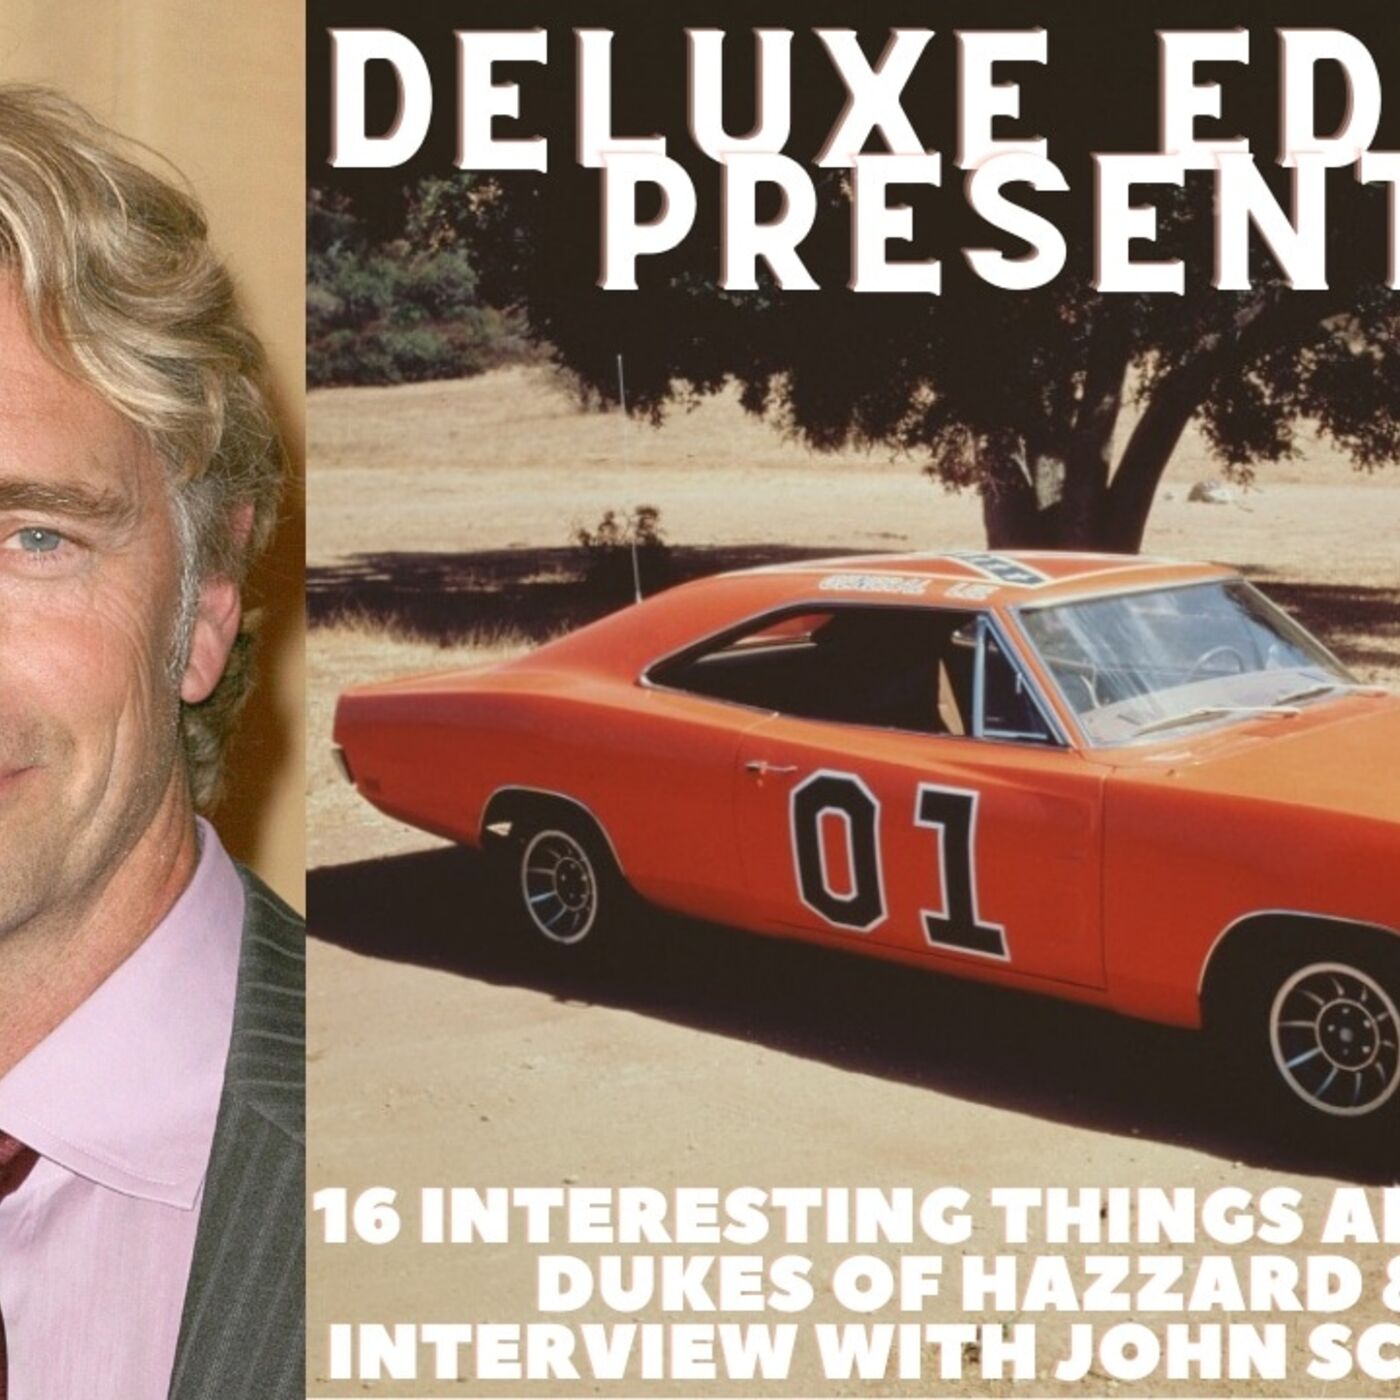 #54 - 16 of The Most Interesting Things About The Dukes of Hazzard & An Interview With John Schneider